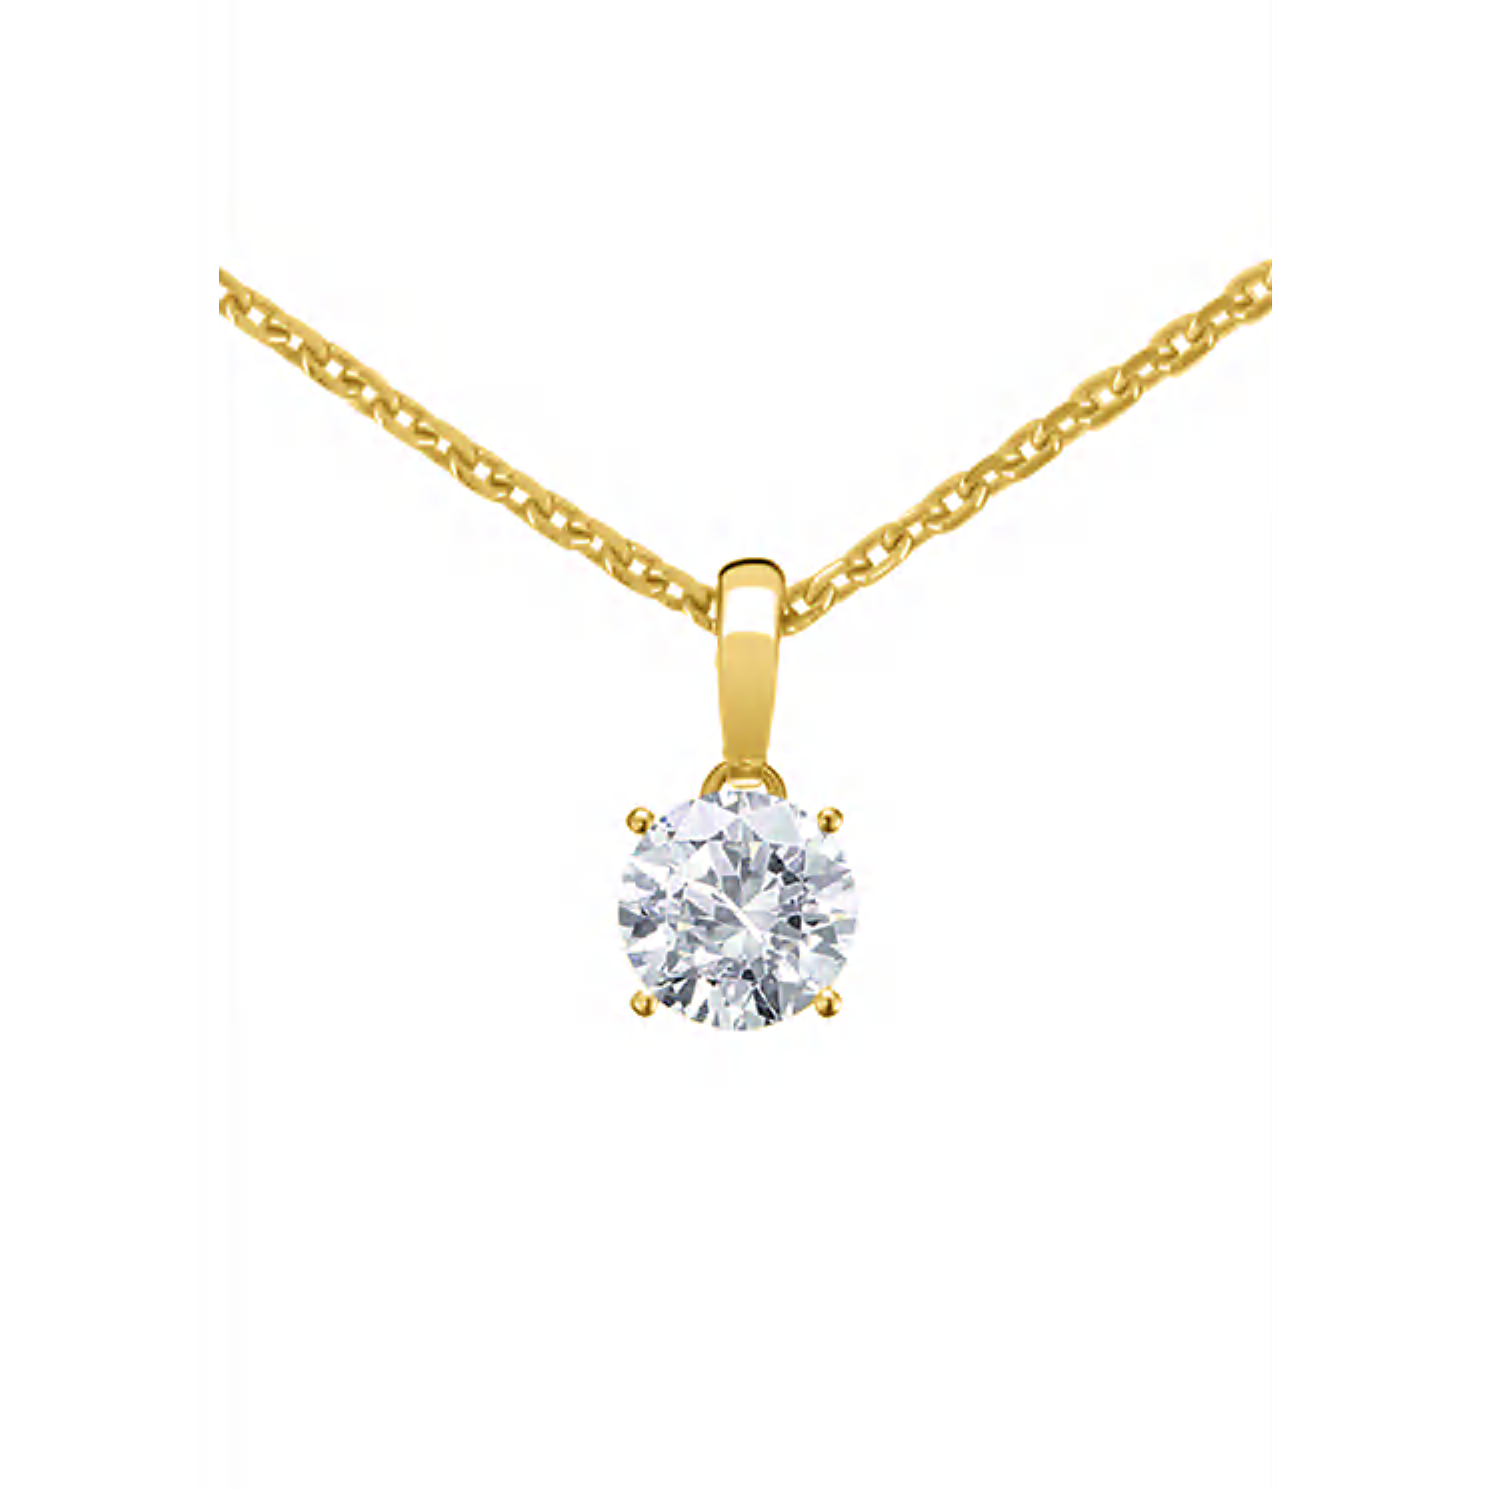 CHOPARD FOR EVER PENDANT